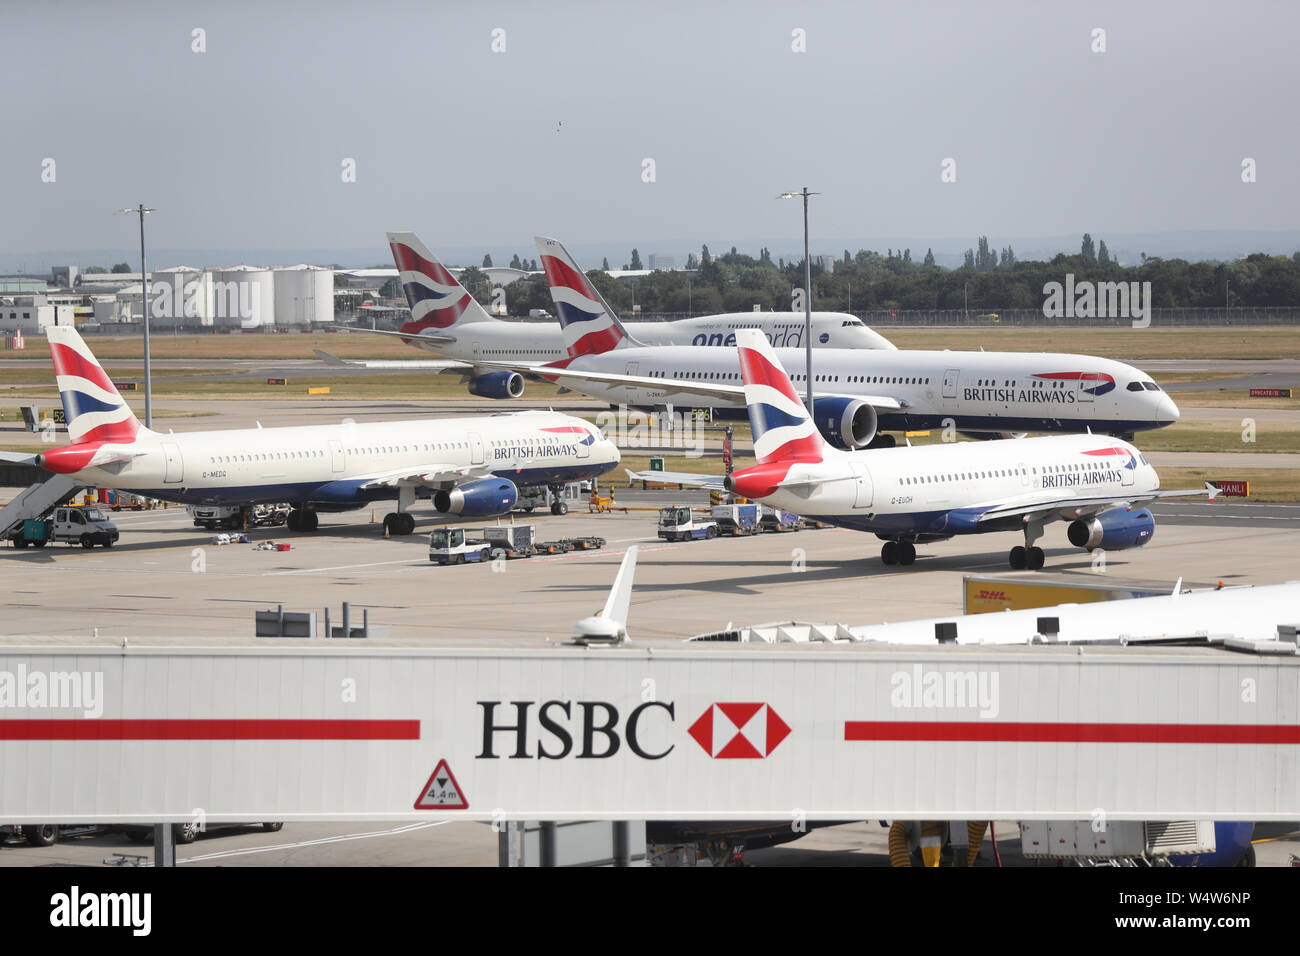 Planes on the runway at Heathrow airport. The UK has surpassed the hottest July day on record, with 36.9 degrees celsius at Heathrow being recorded. The UK's all-time record of 38.5 degrees may be broken later this afternoon. Stock Photo